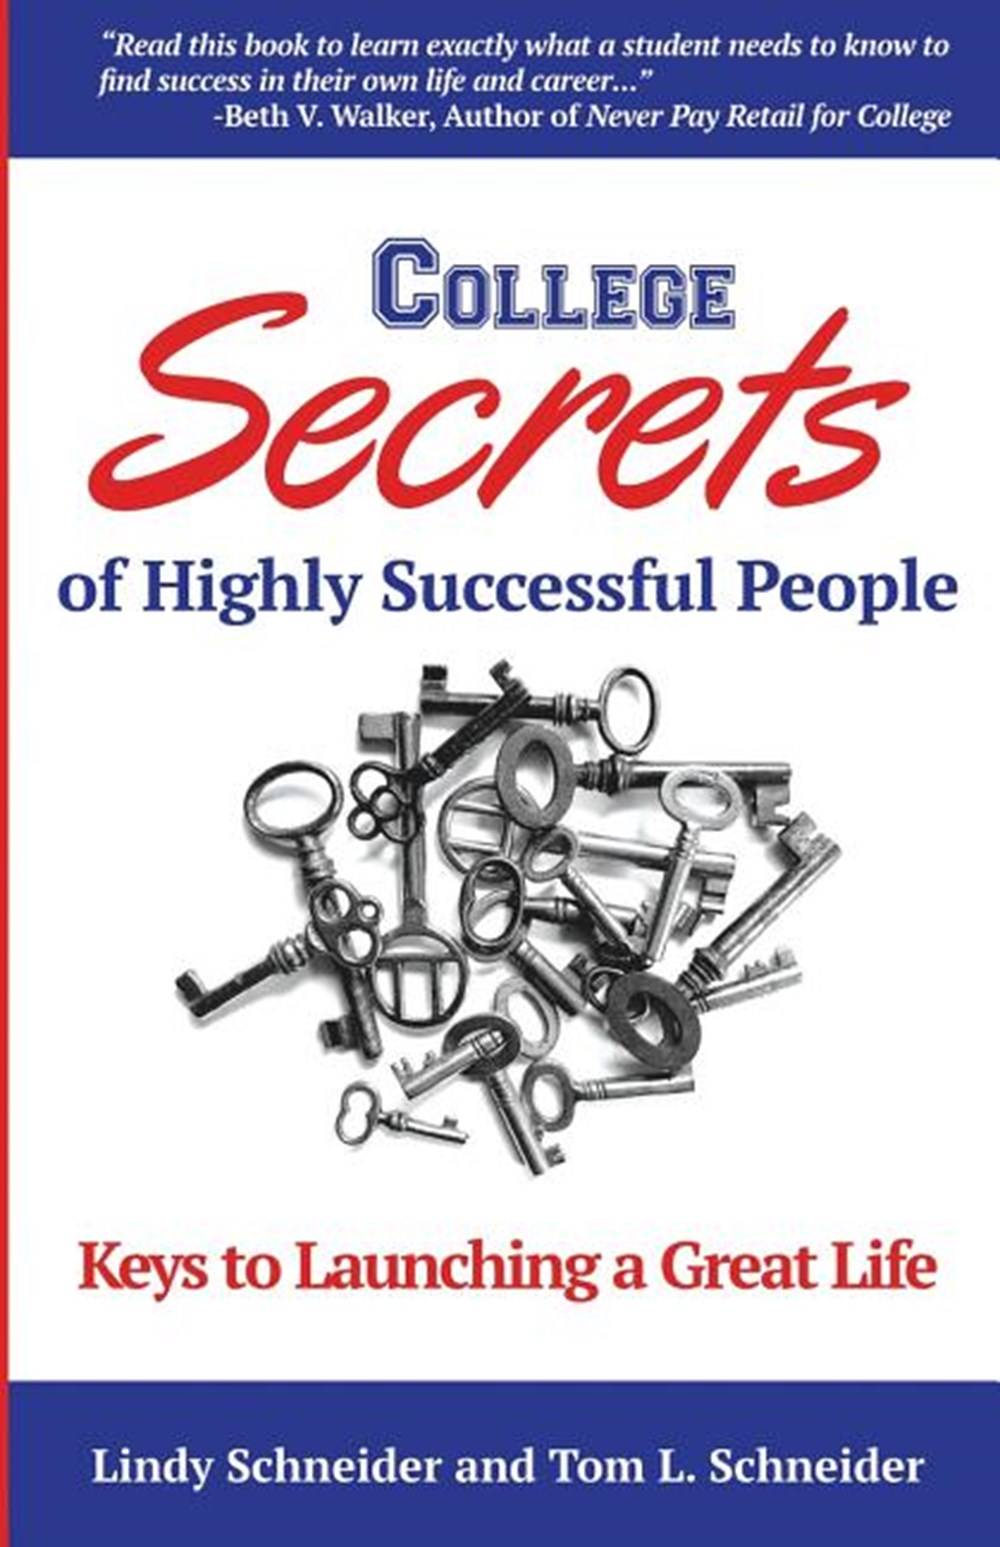 College Secrets of Highly Successful People Keys to Launching a Great Life